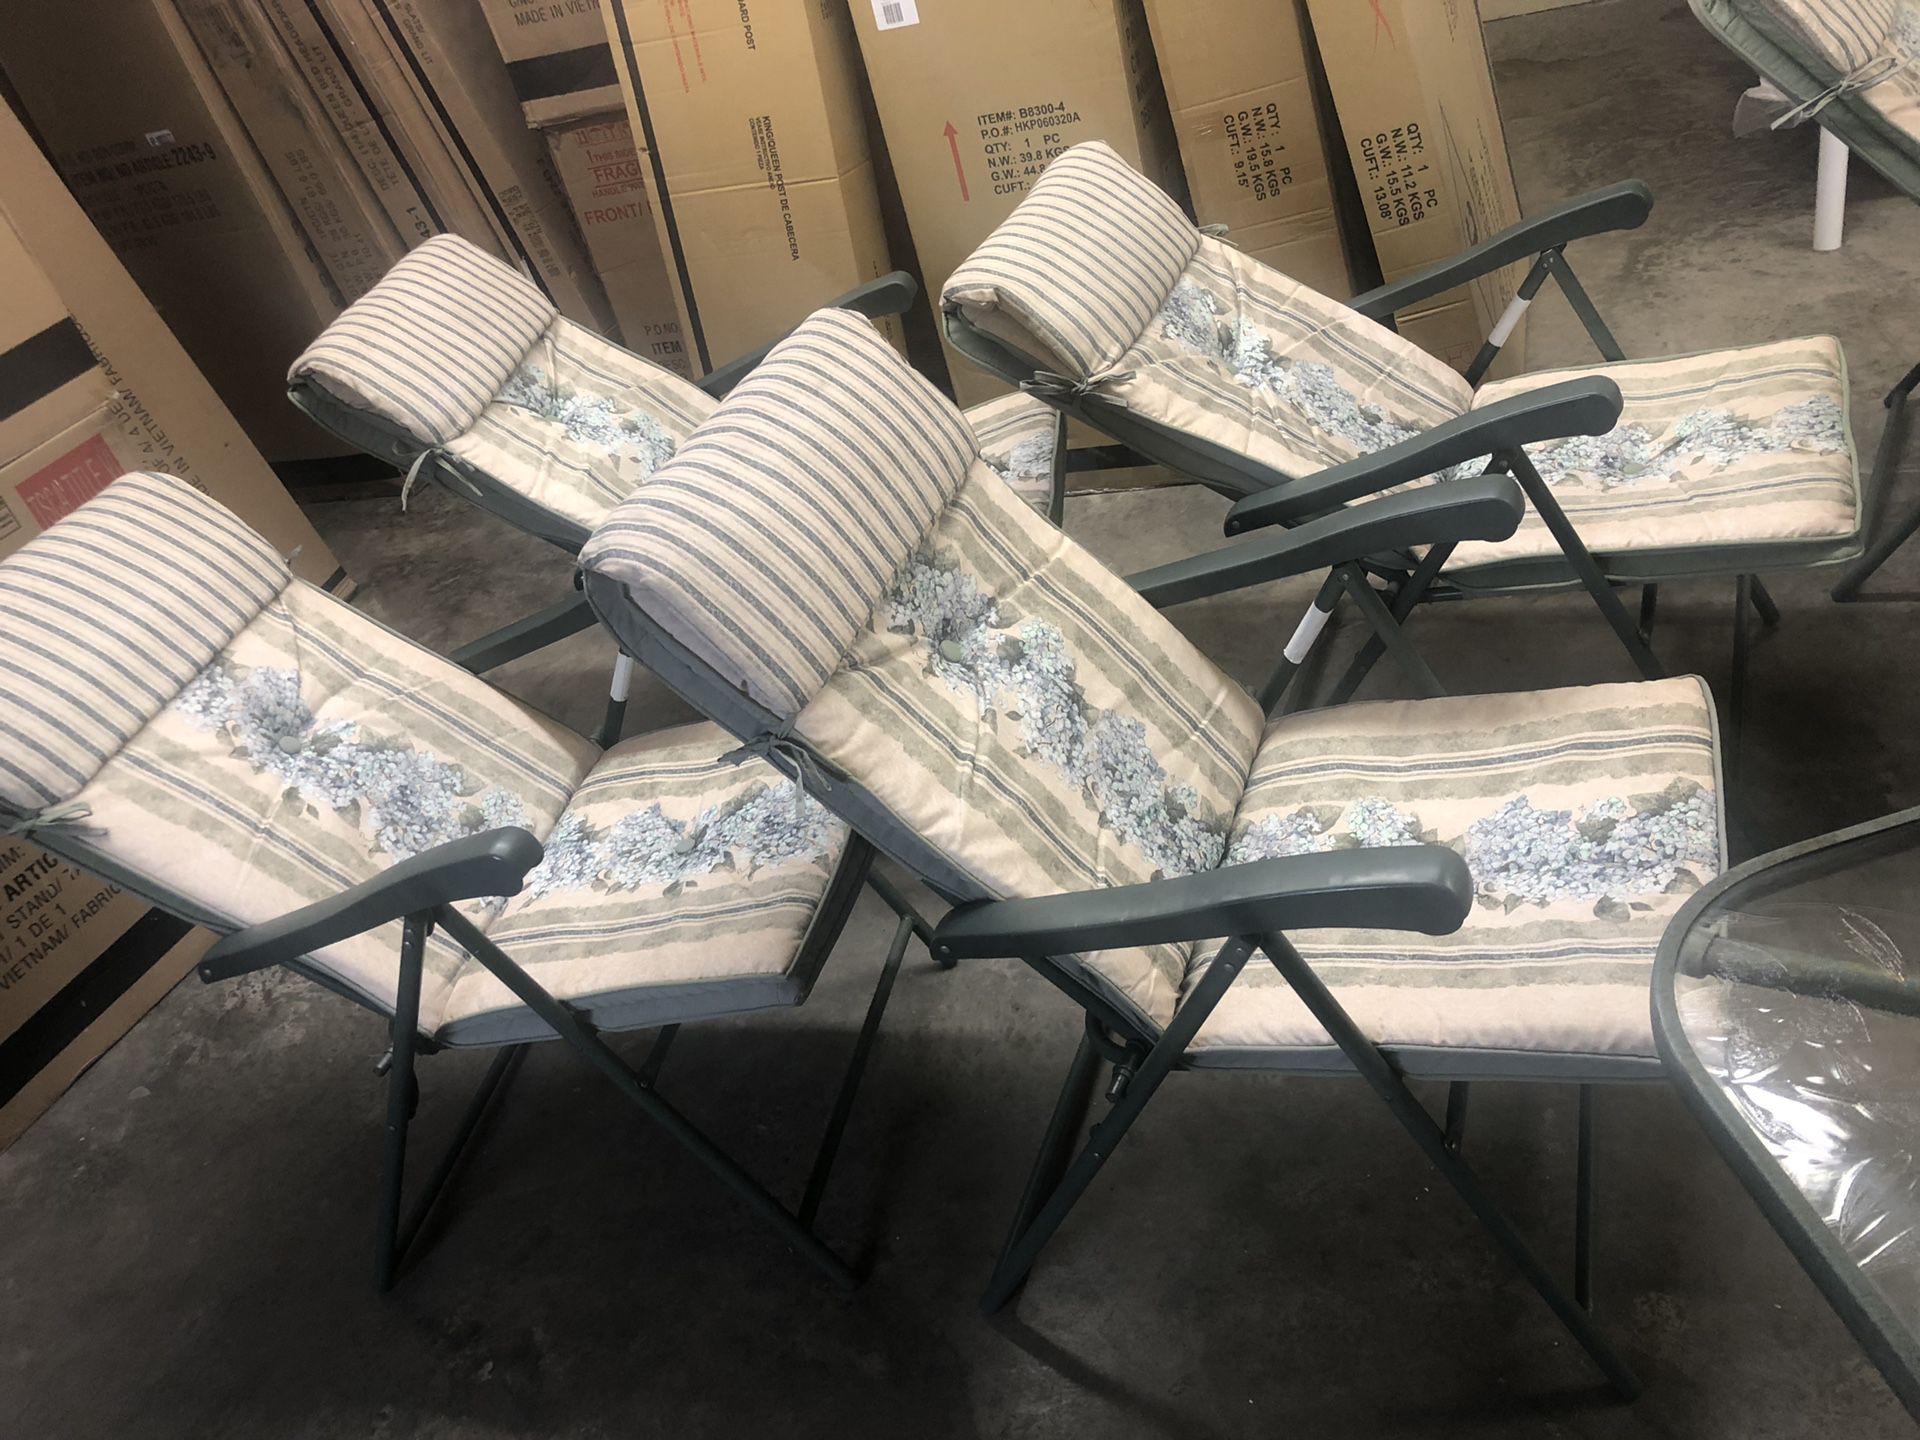 Patio Table 6 chairs $199.95 6 chairs only $49.95 each